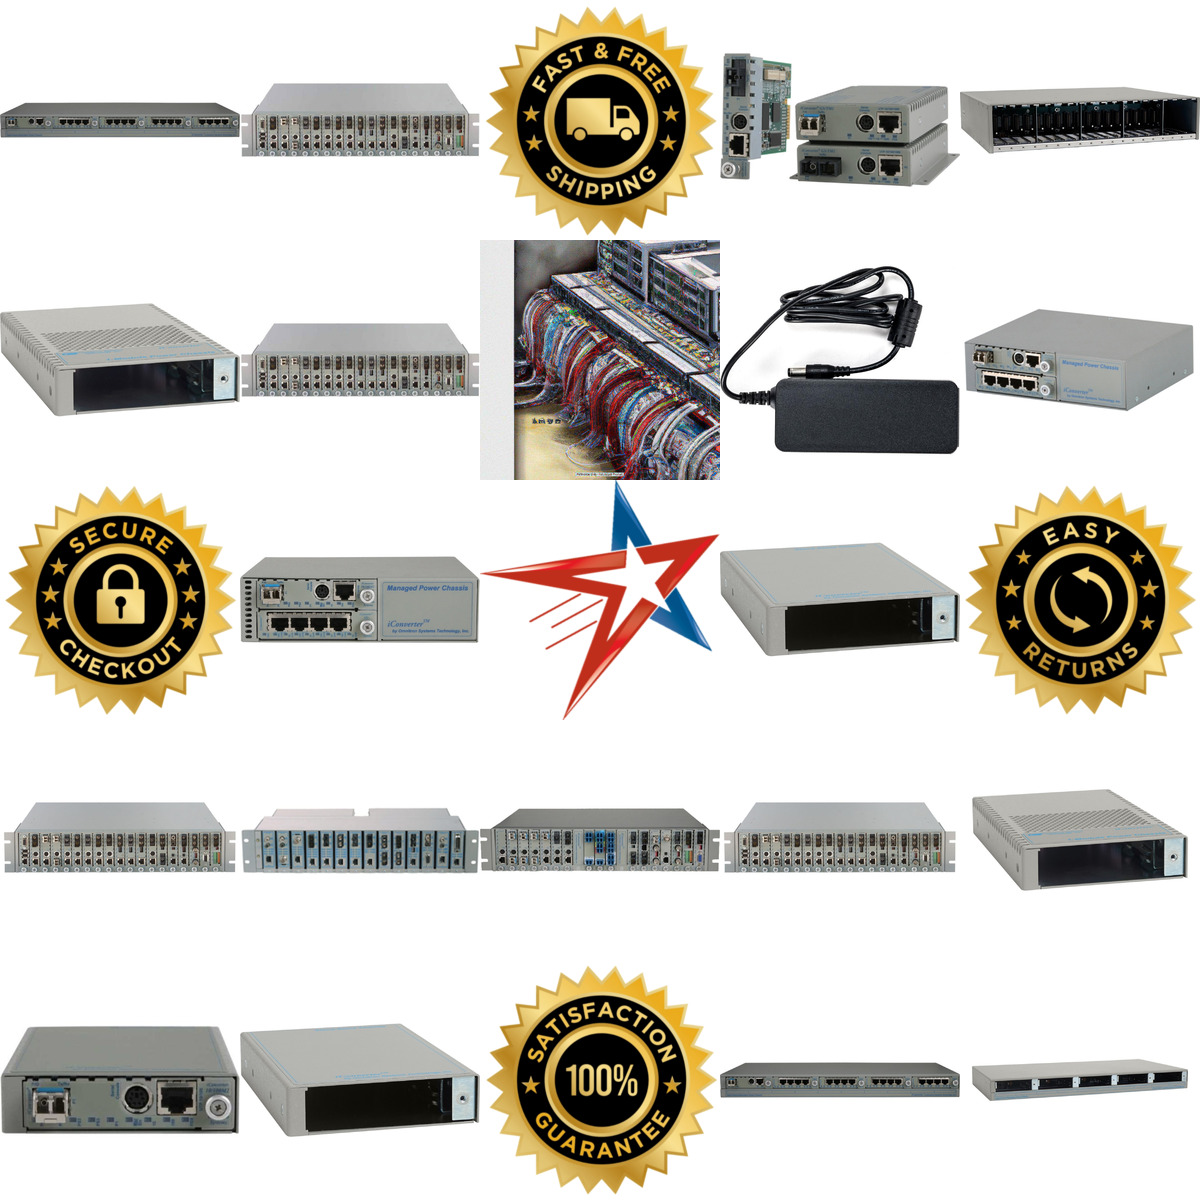 A selection of Rack Mount Lcd and Keyboard Servers products on GoVets